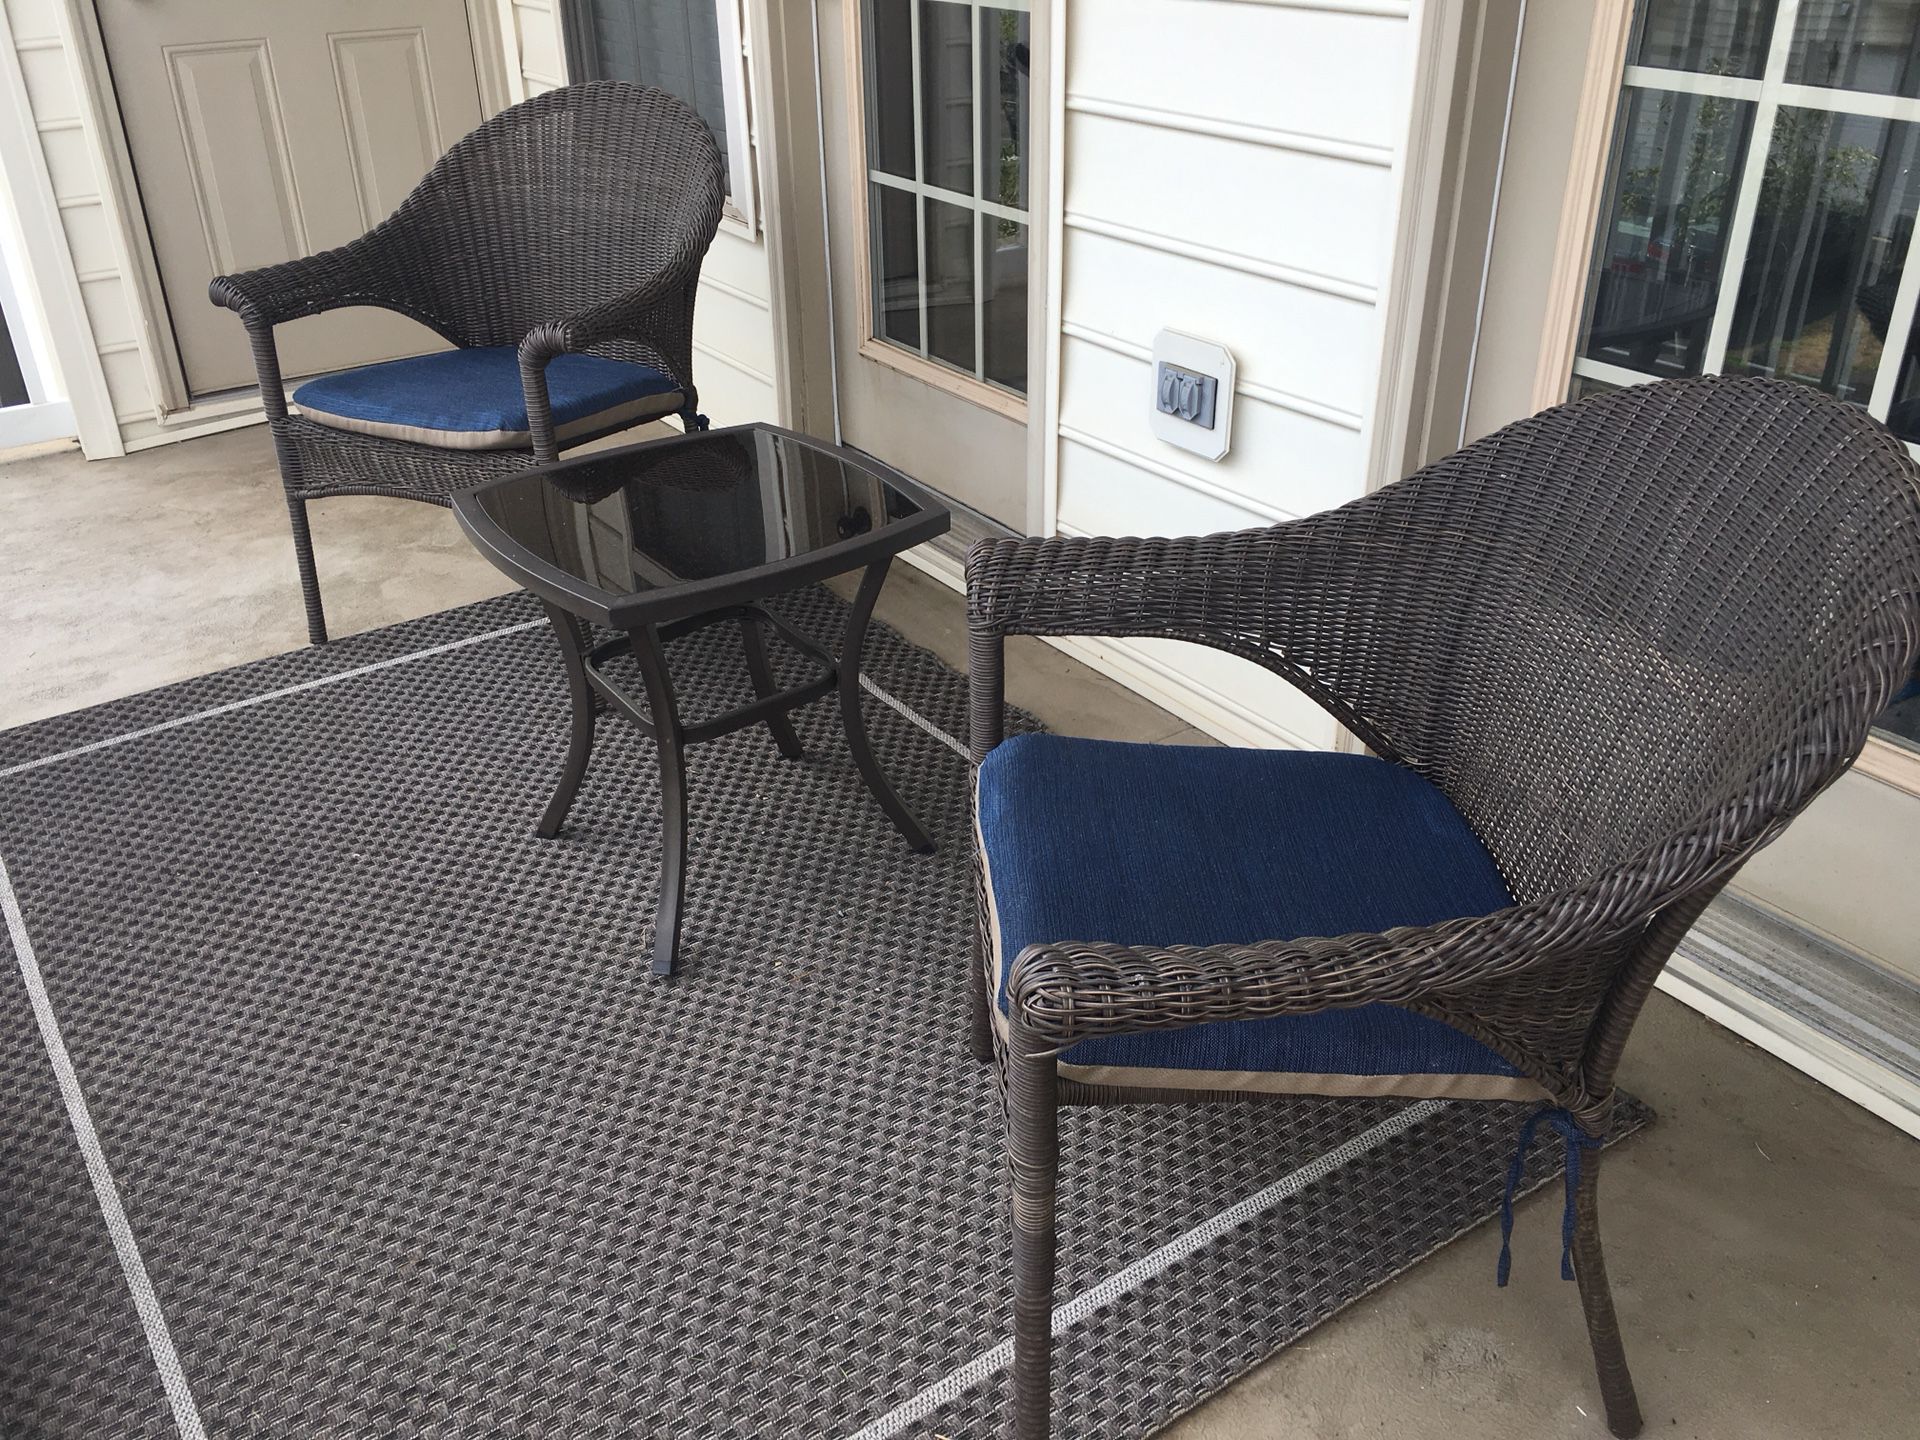 Barely used Patio Furniture (including rug)